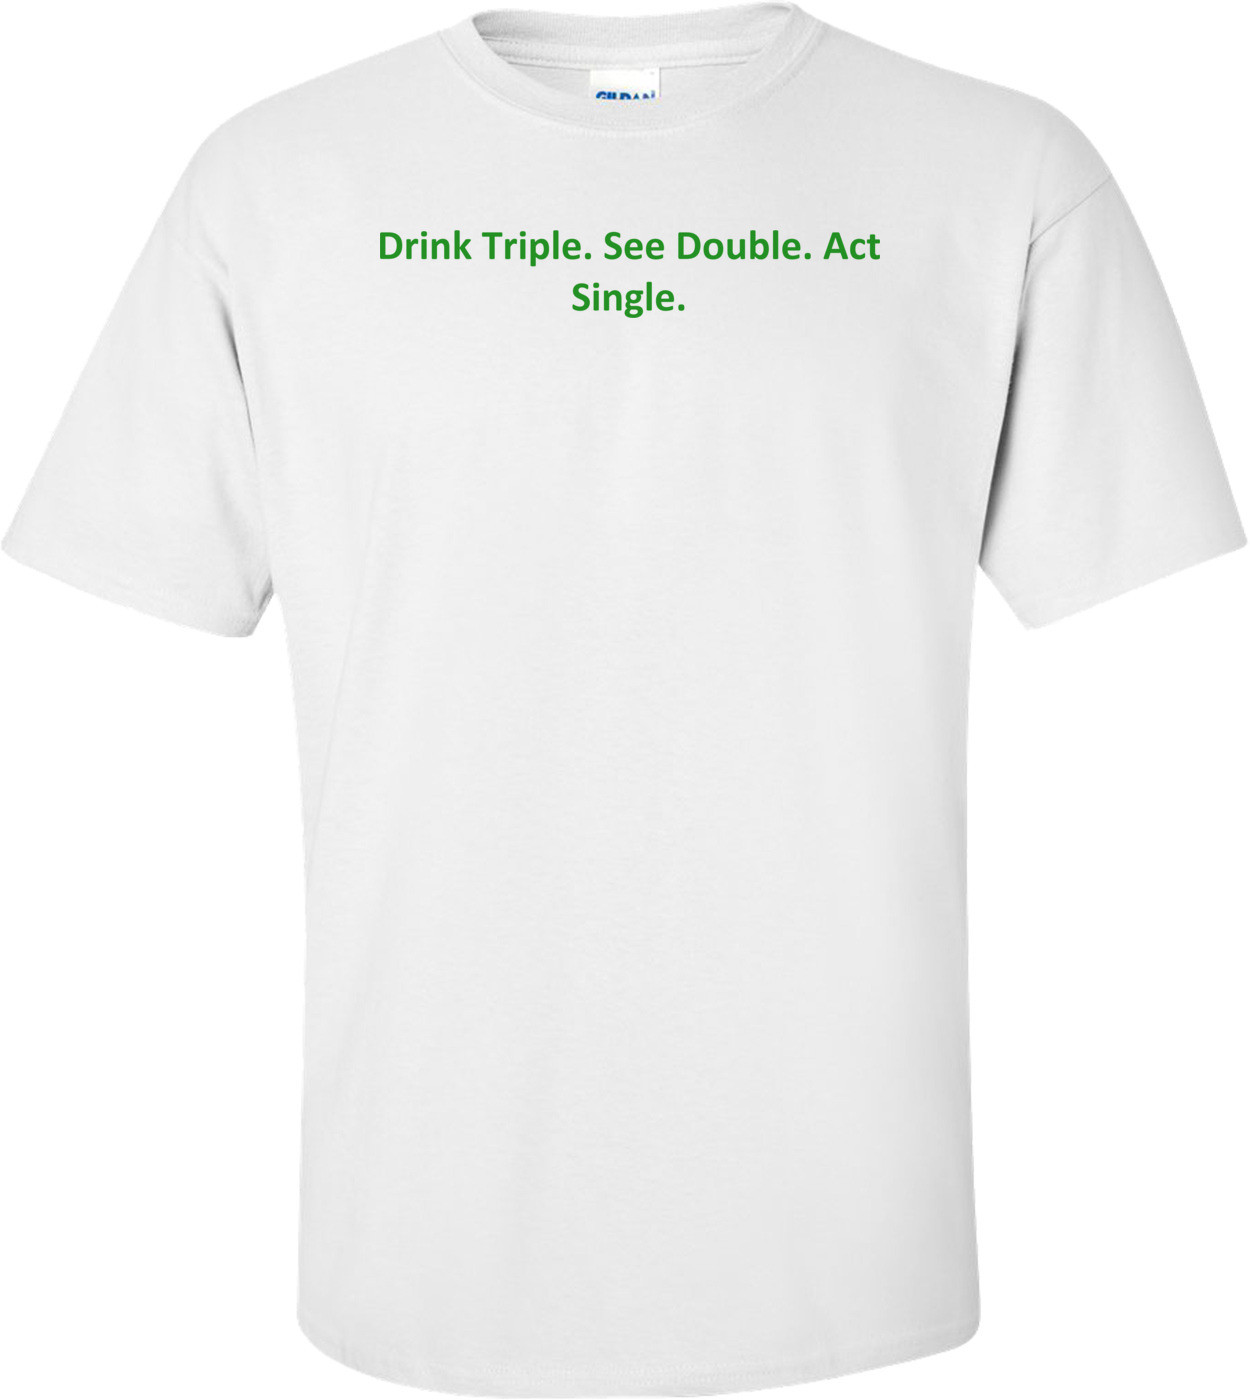 Drink Triple. See Double. Act Single. Shirt